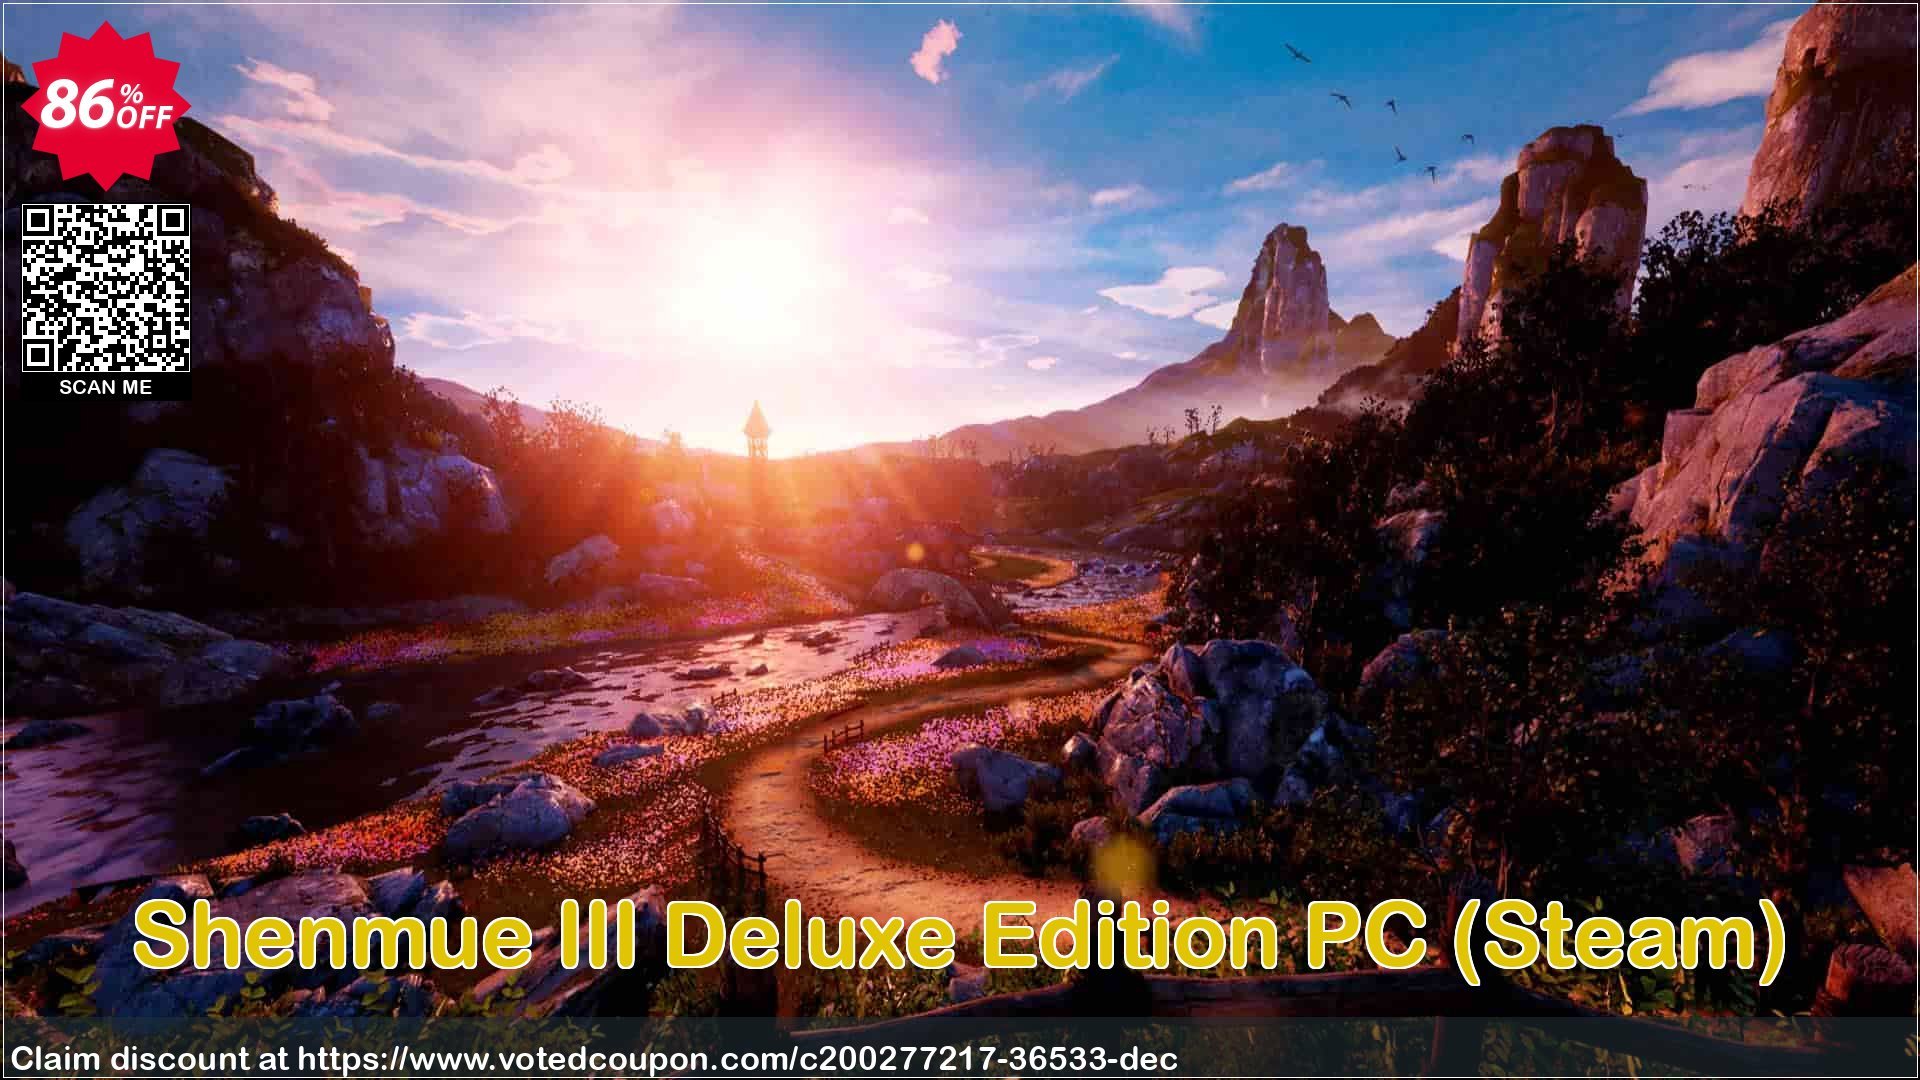 Shenmue III Deluxe Edition PC, Steam  Coupon Code Apr 2024, 86% OFF - VotedCoupon